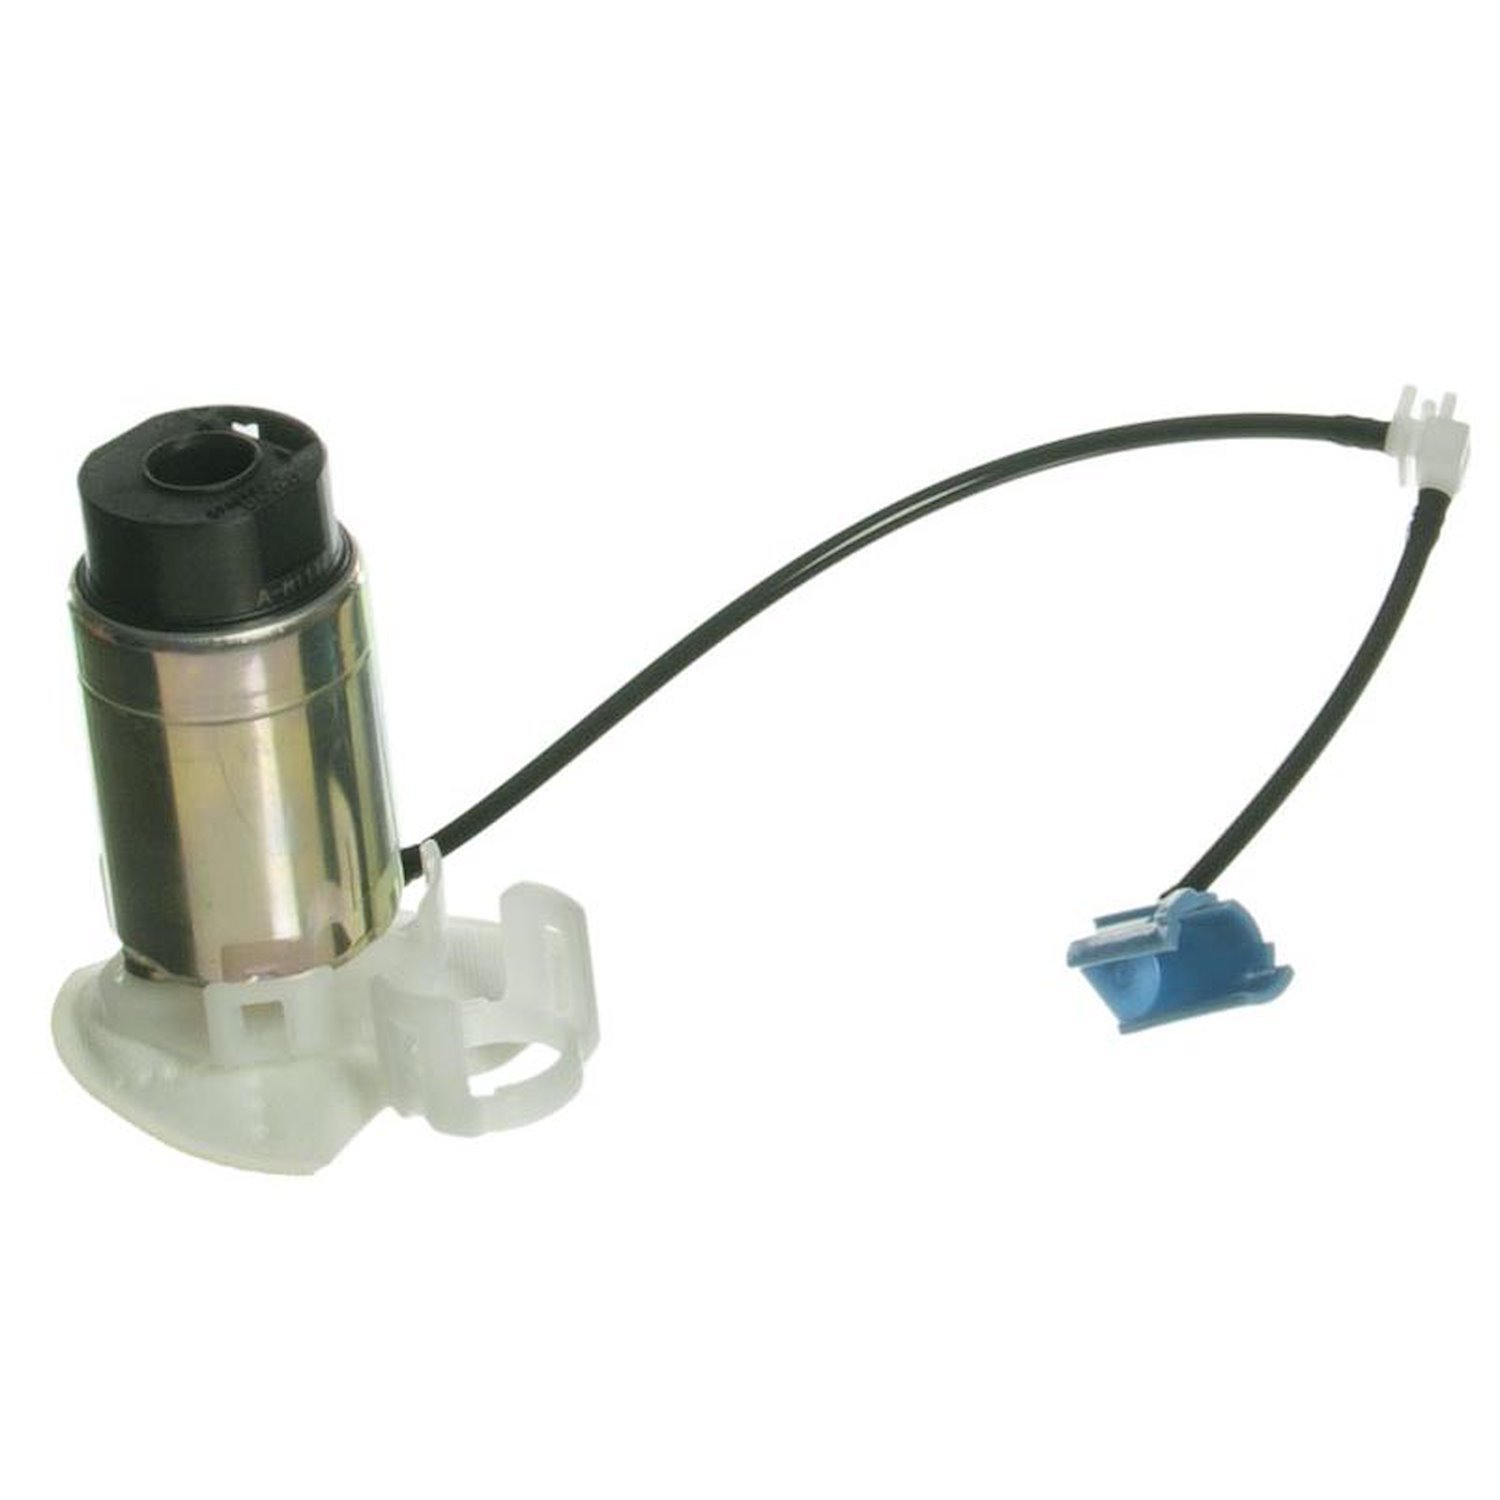 OE Replacement Fuel Pump and Strainer Set for 2007-2008 Toyota Yaris